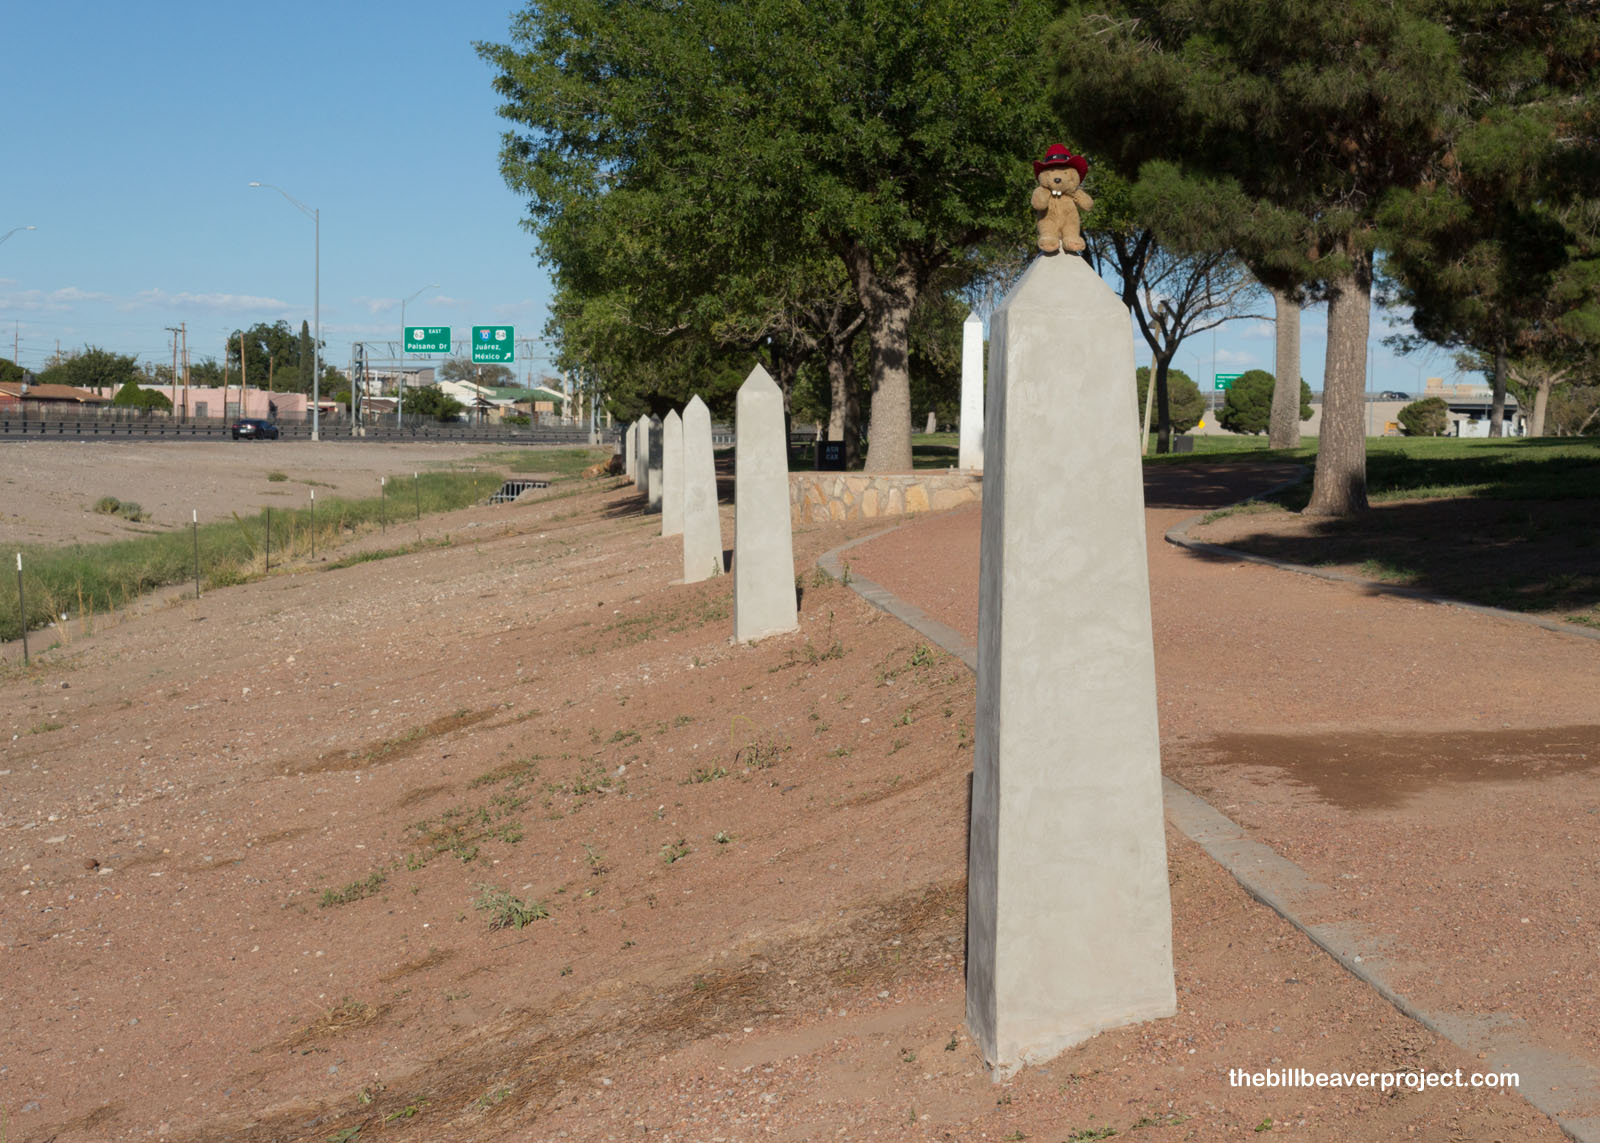 Monuments marking the original US-Mexico boundary line!